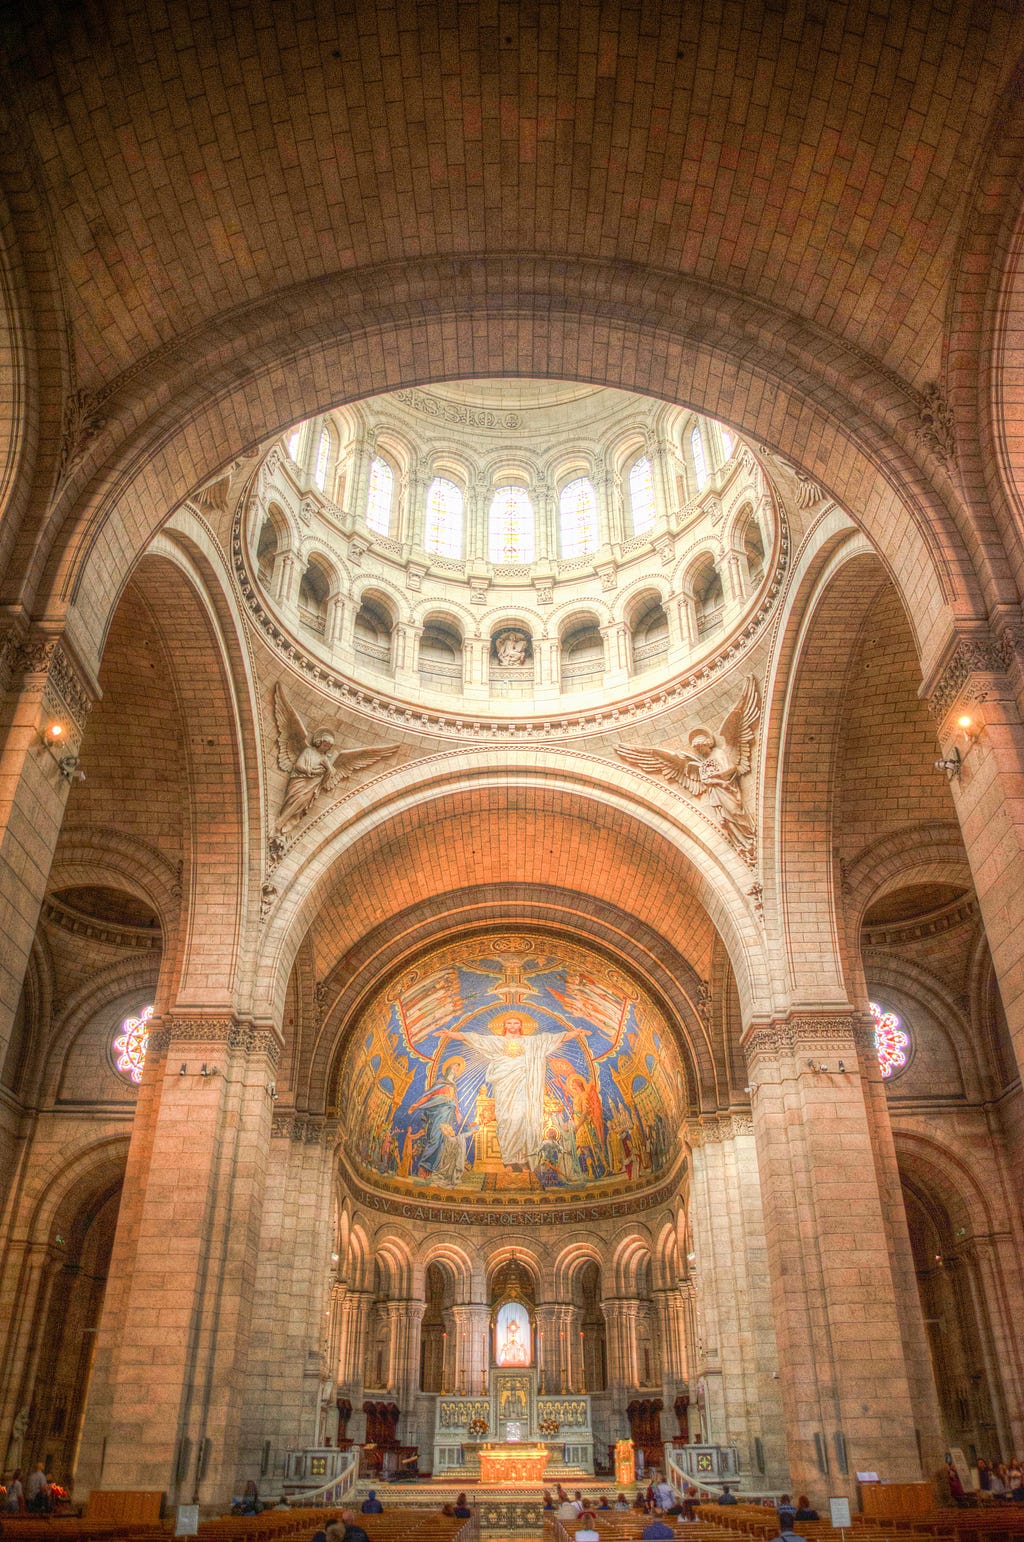 An interior view of a quincunx design, with the central dome and four smaller domes in the corners, plus a semidome over the apse. Credit to Skitterphoto on Pexels.